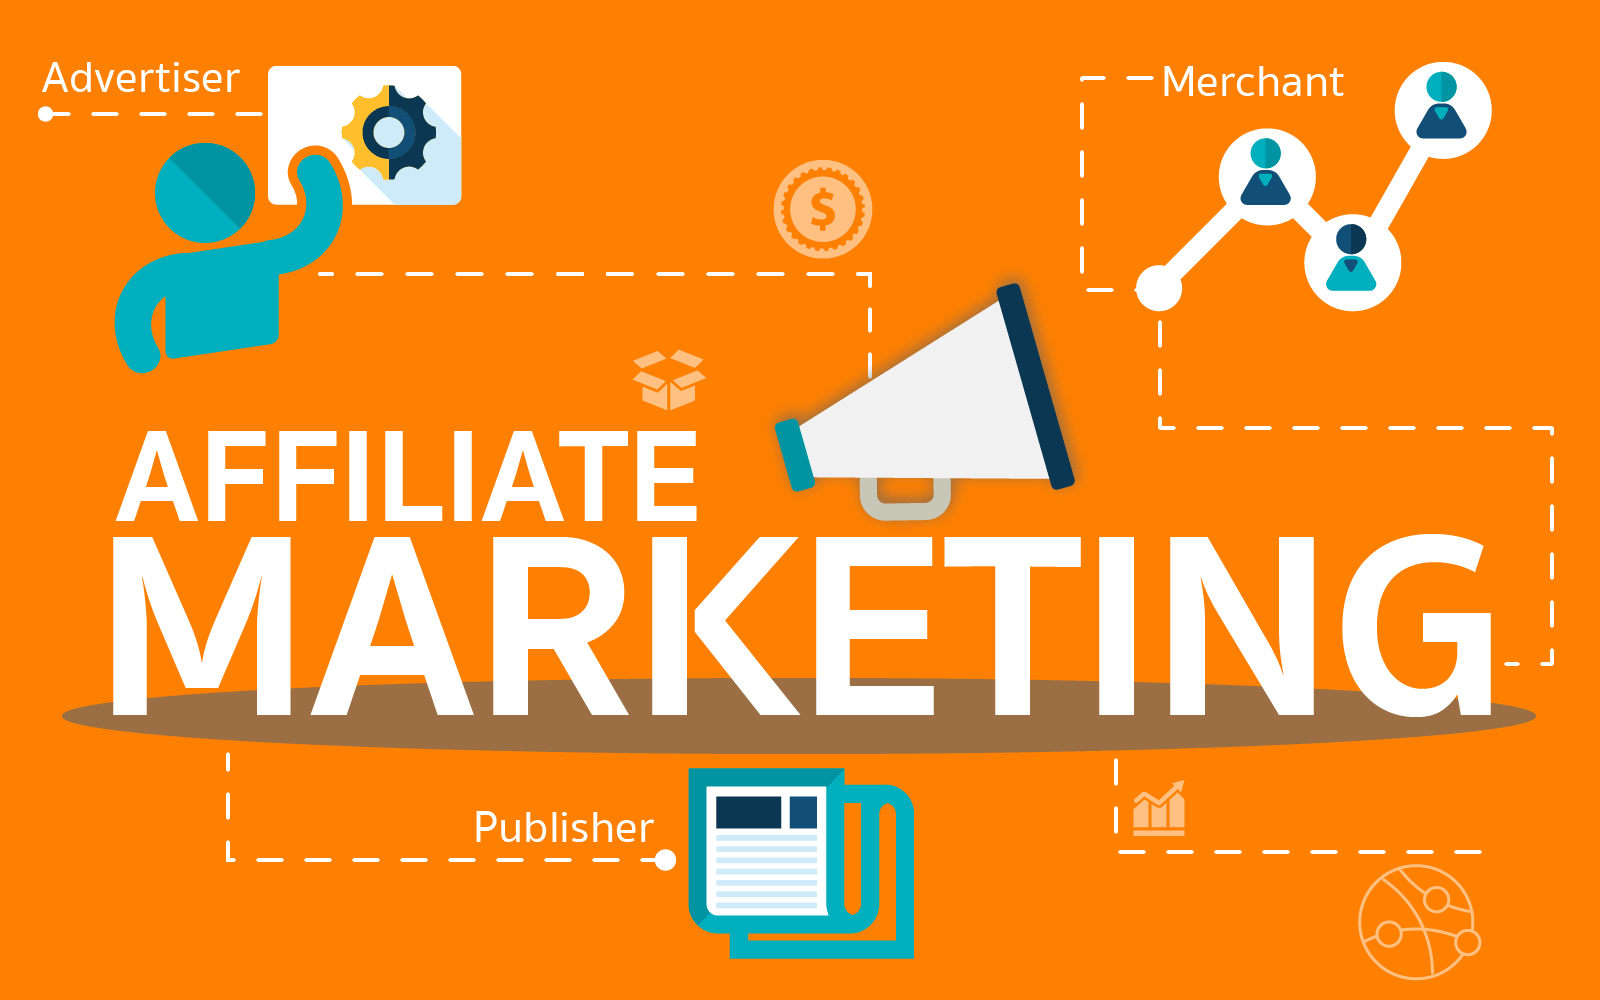 How To Start Affiliate Marketing With No Money